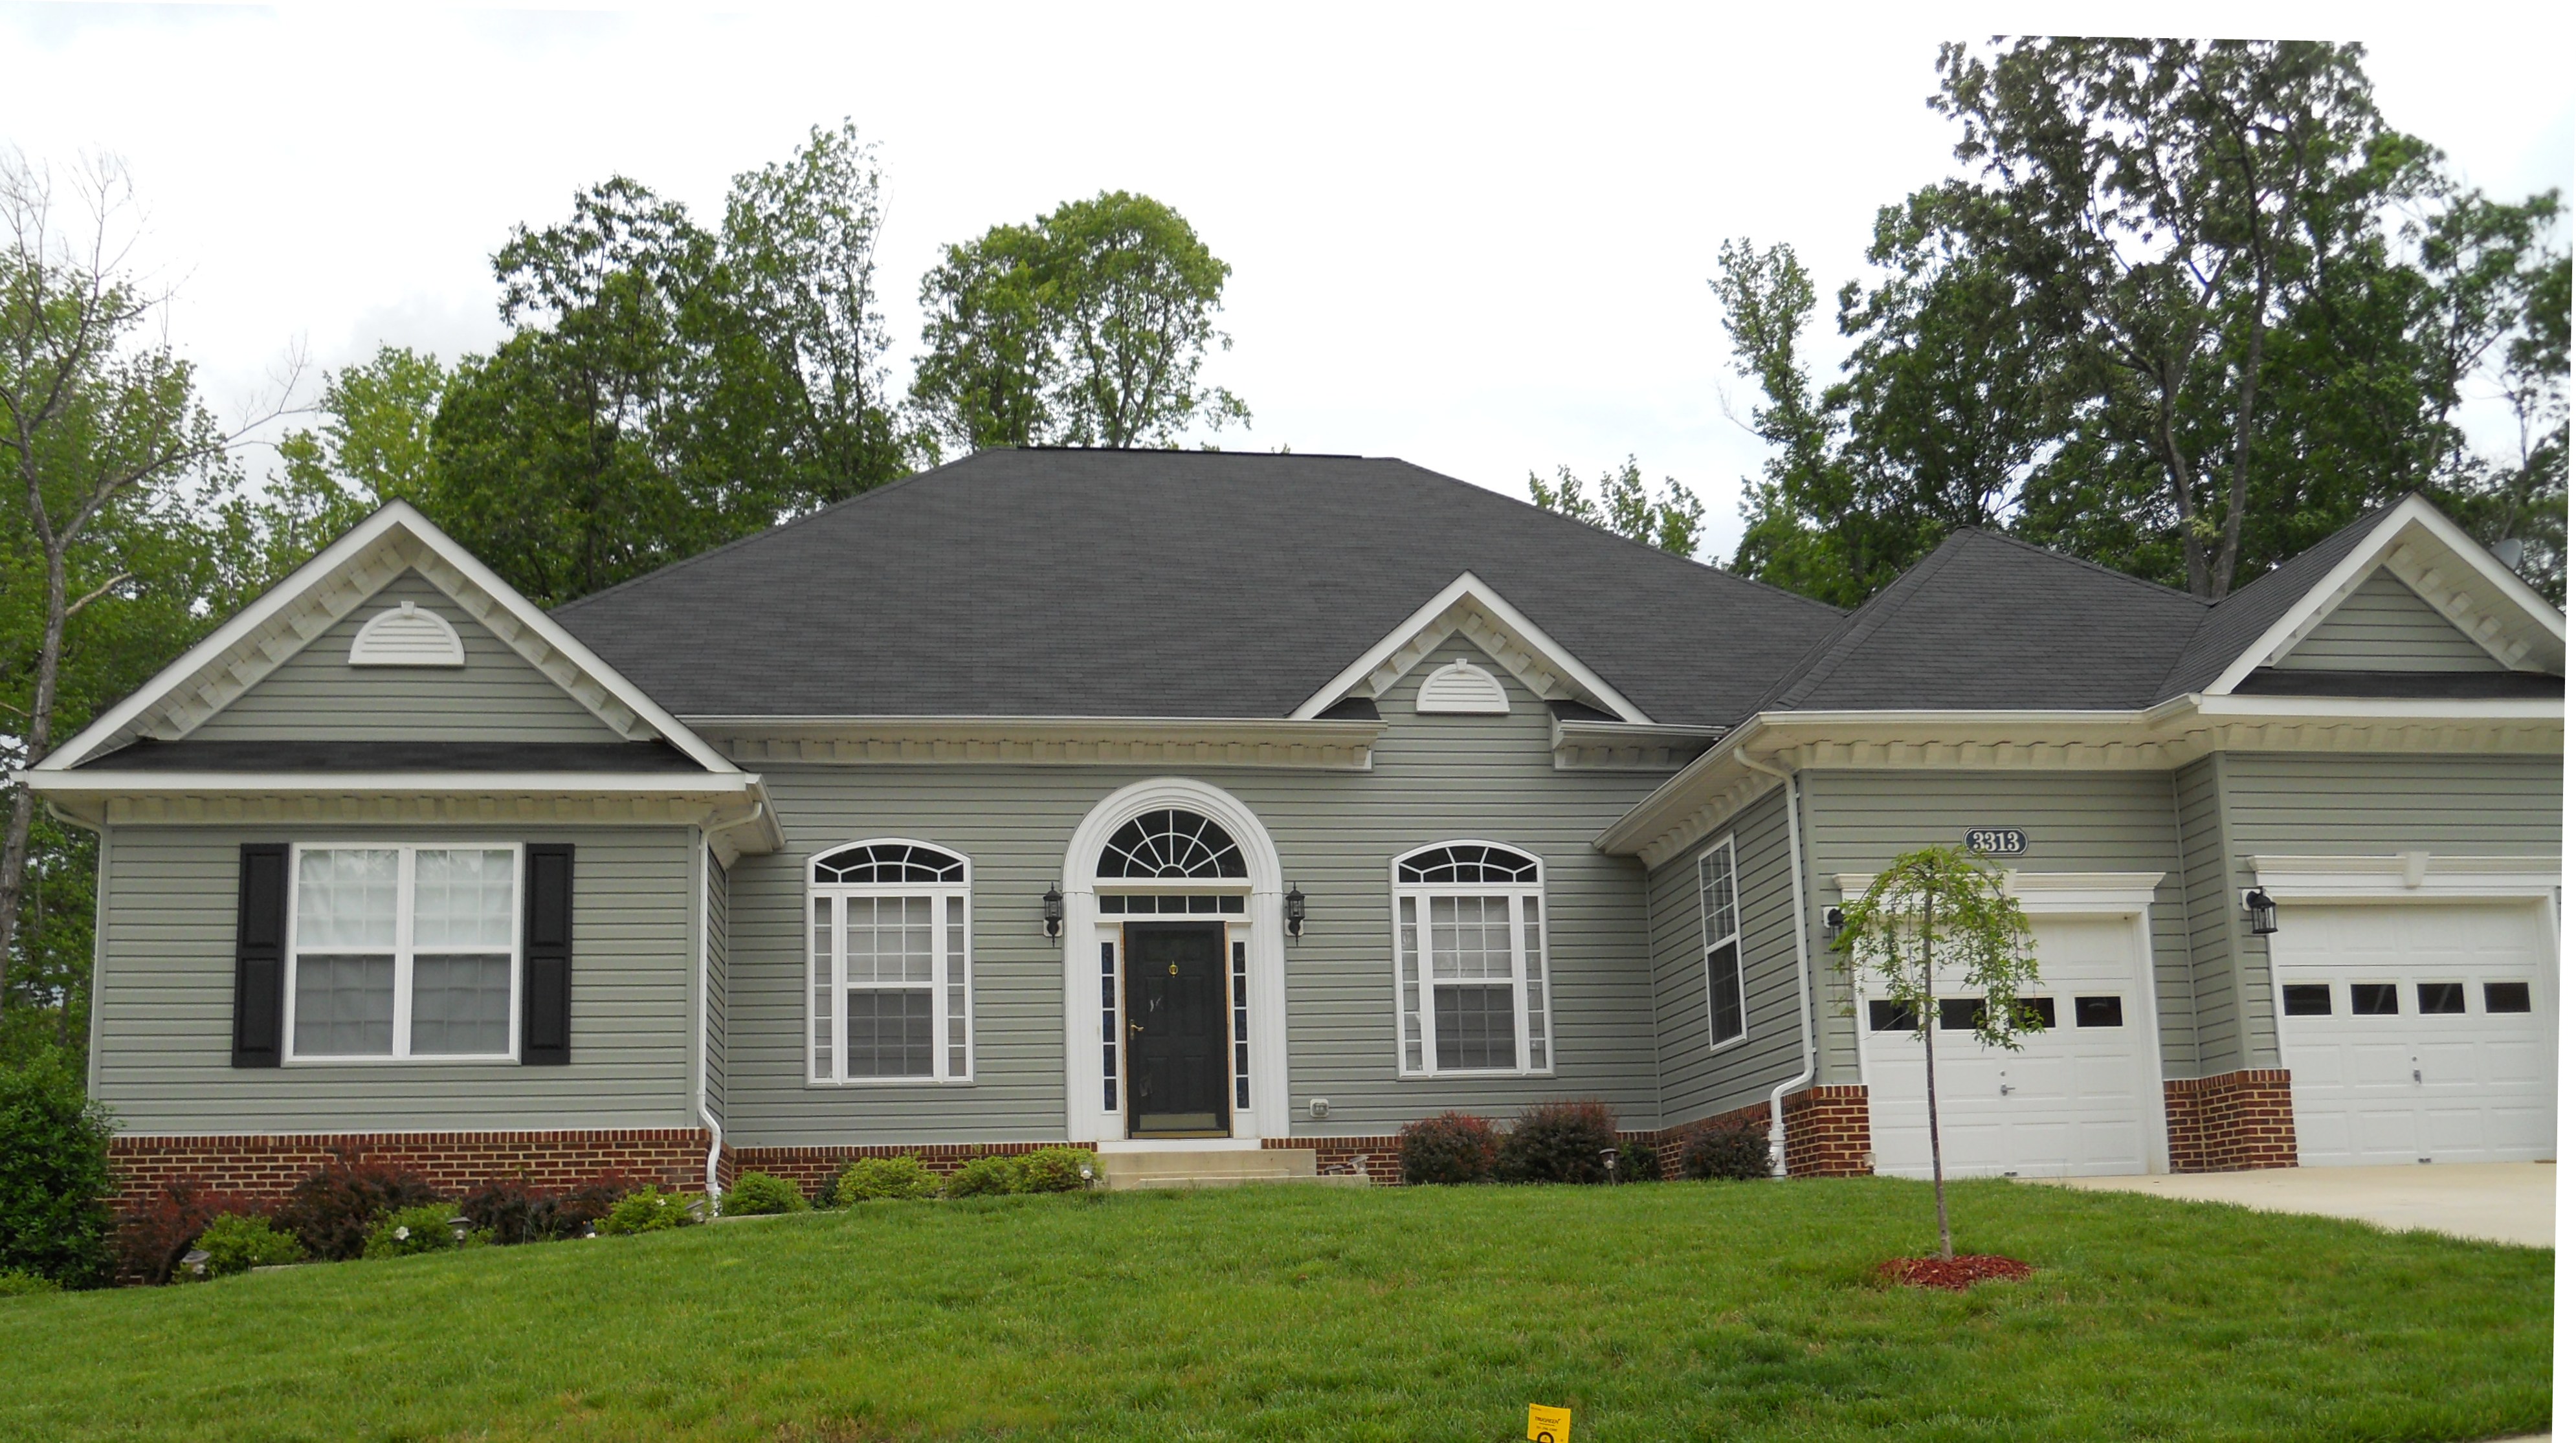 Ranch Style Single Family Homes For Sale In Fayetteville Ga